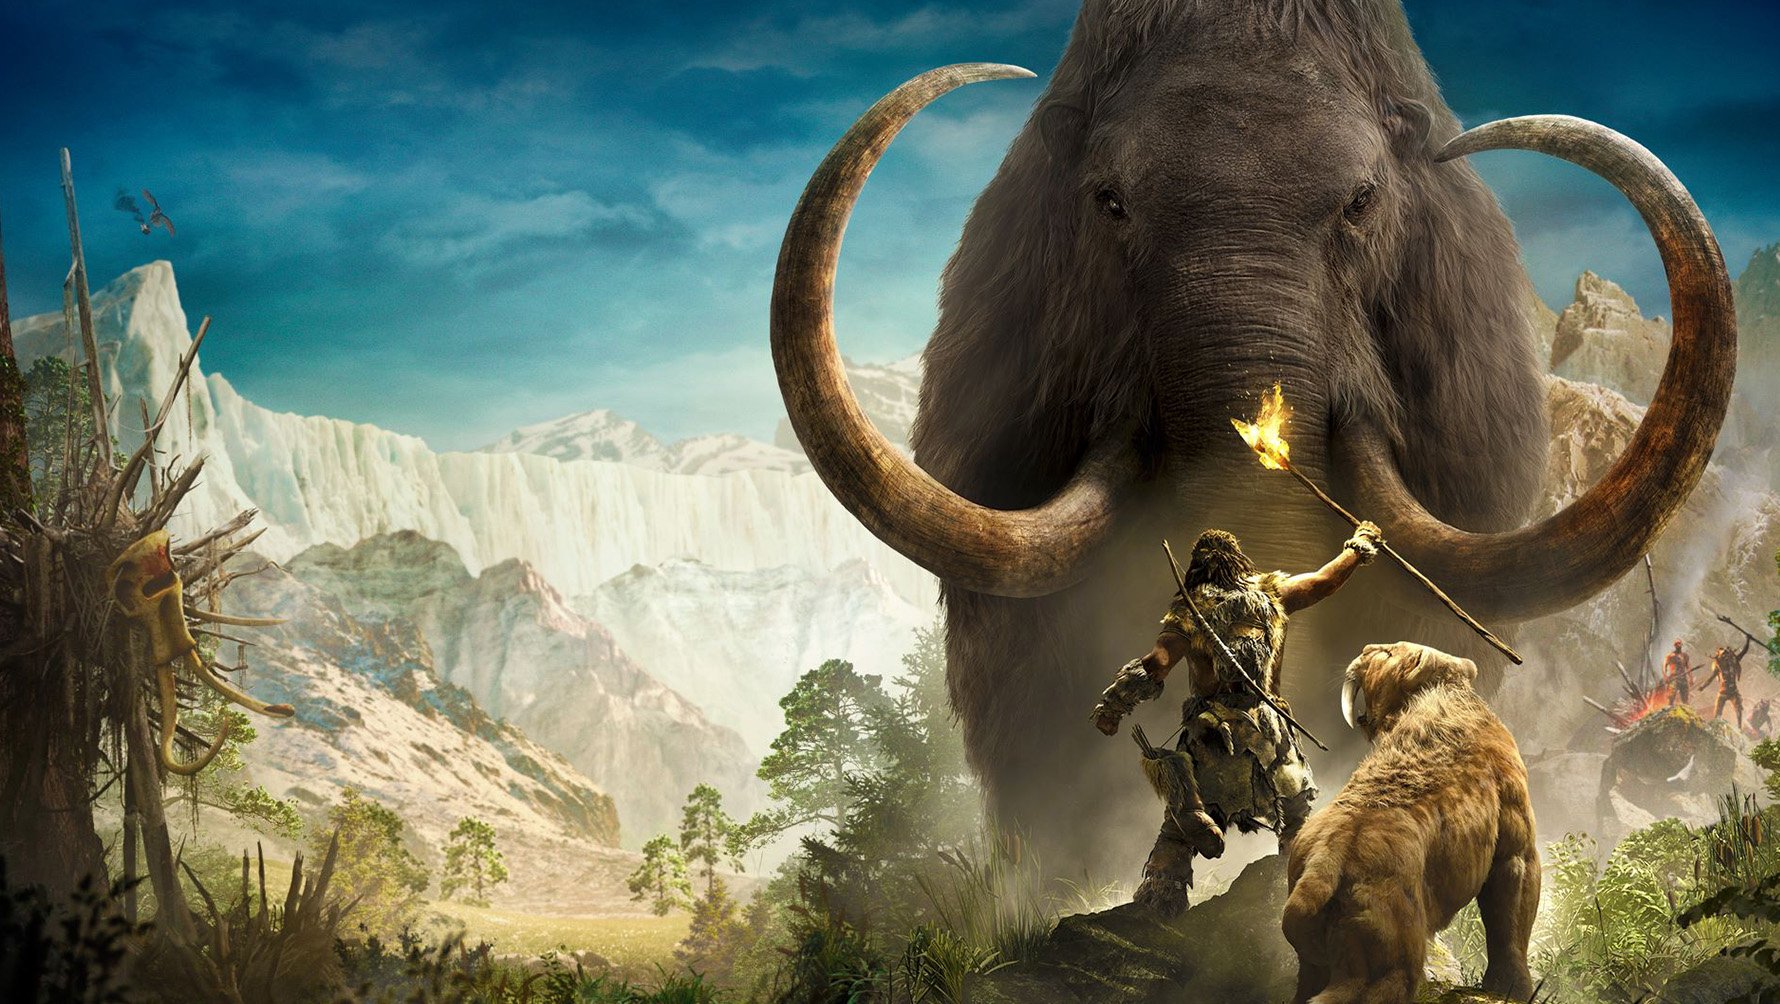 far cry primal unable to locate uplay pc